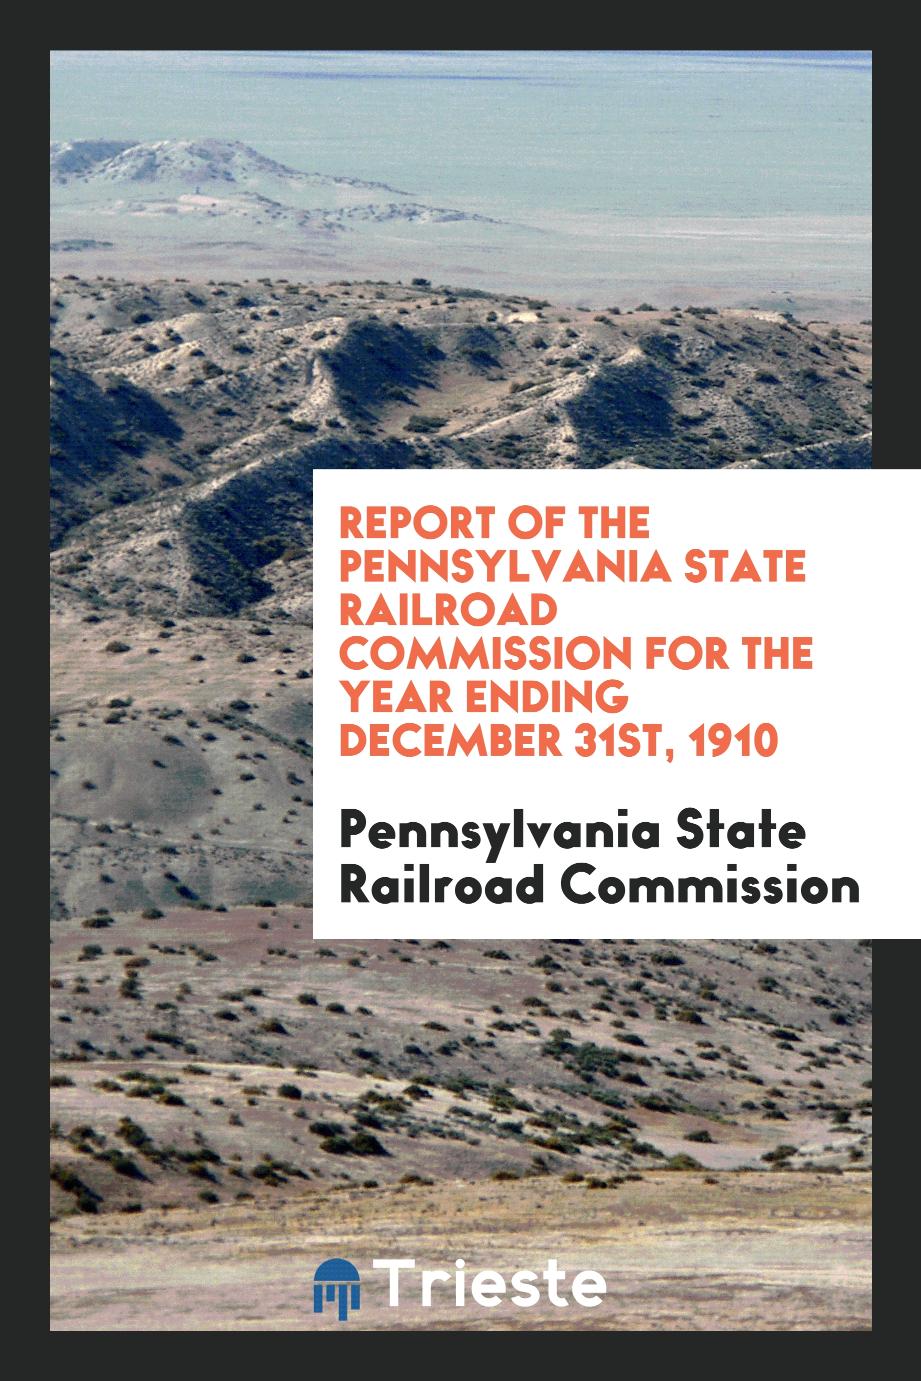 Report of the Pennsylvania State Railroad Commission for the Year Ending December 31st, 1910